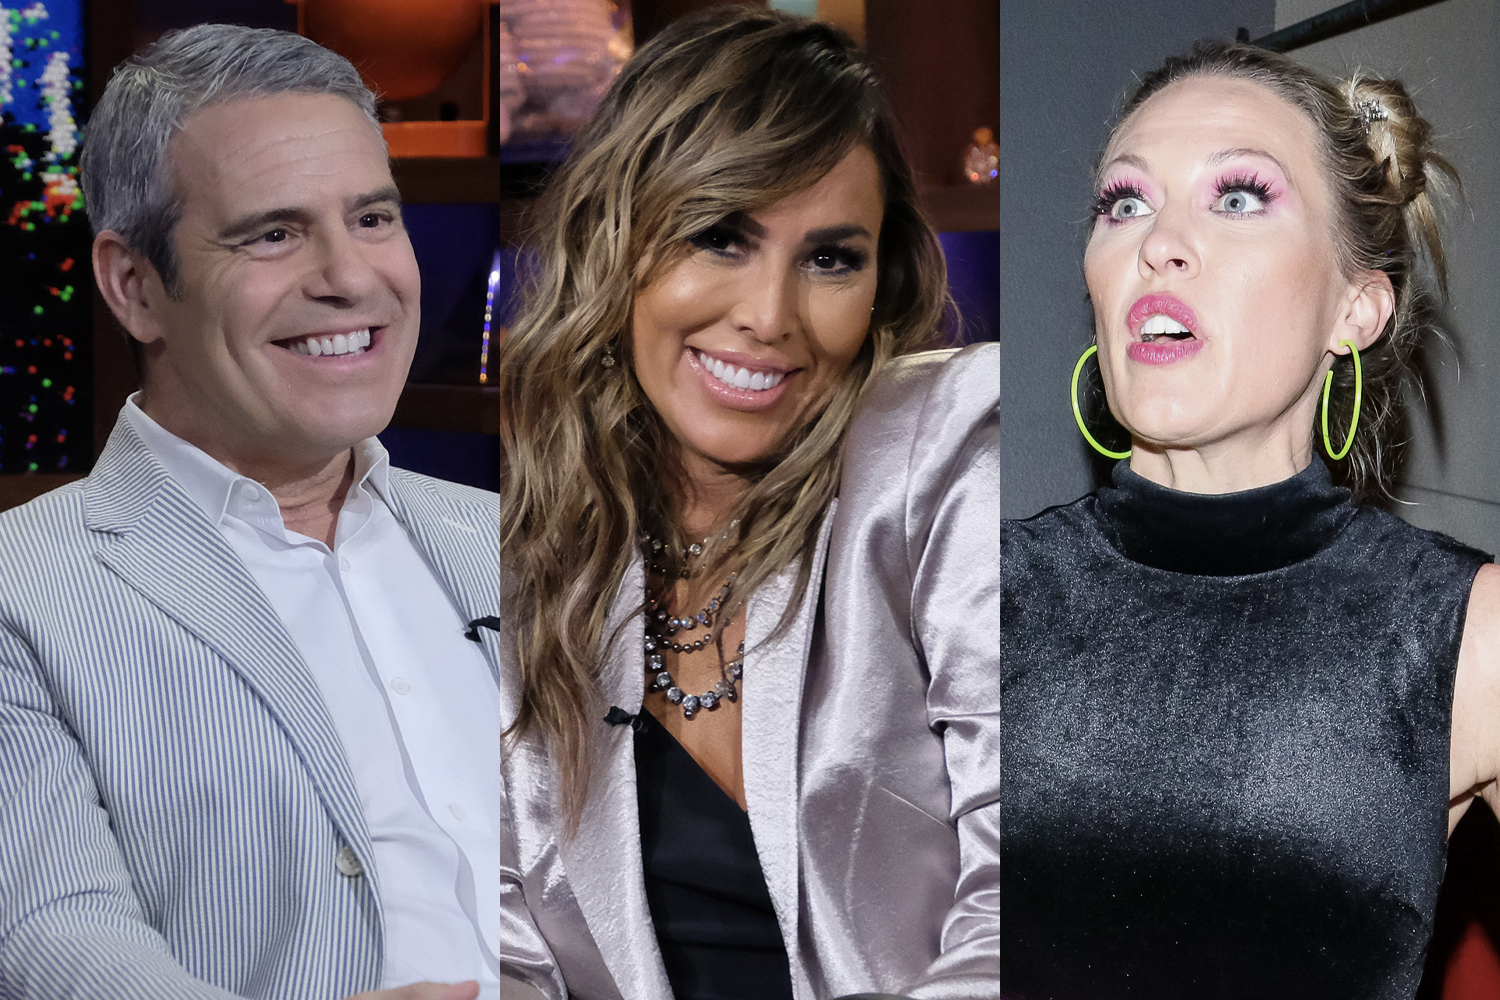 ‘RHOC’: Kelly Dodd Taunts Braunwyn Windham-Burke for Not Getting Call From Andy Cohen Before Exit